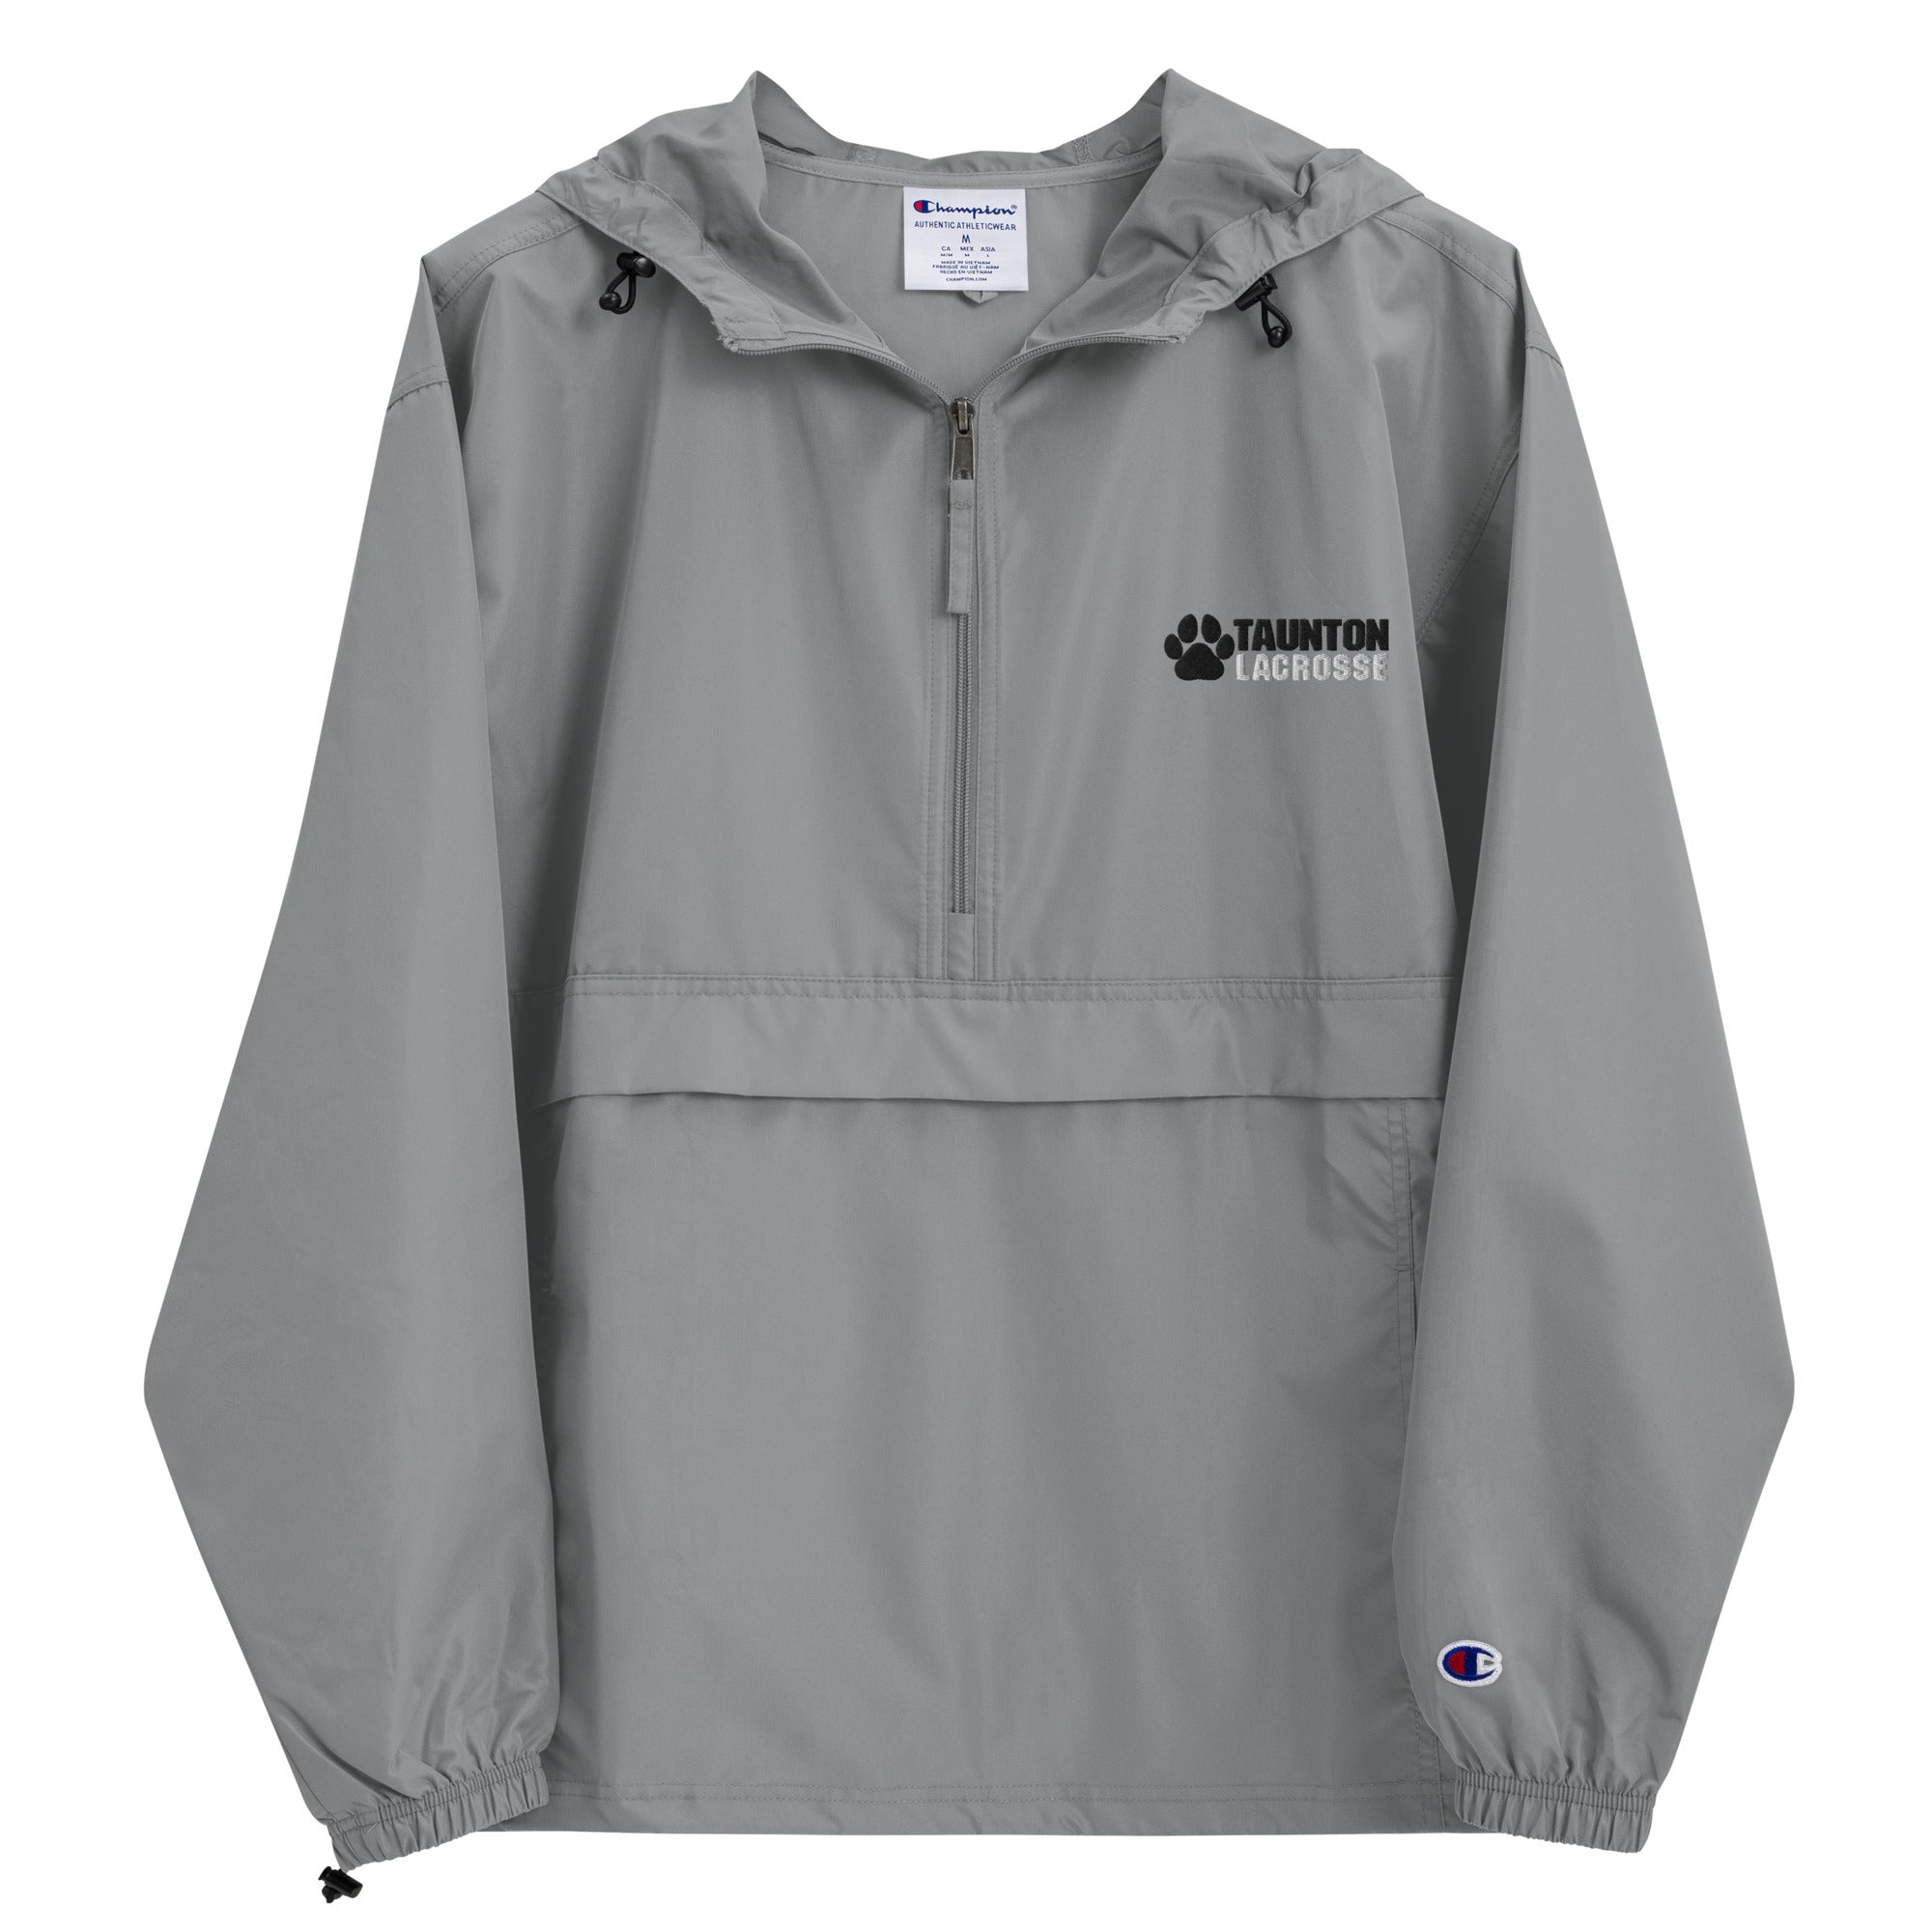 Taunton Lacrosse Embroidered Champion Packable Jacket